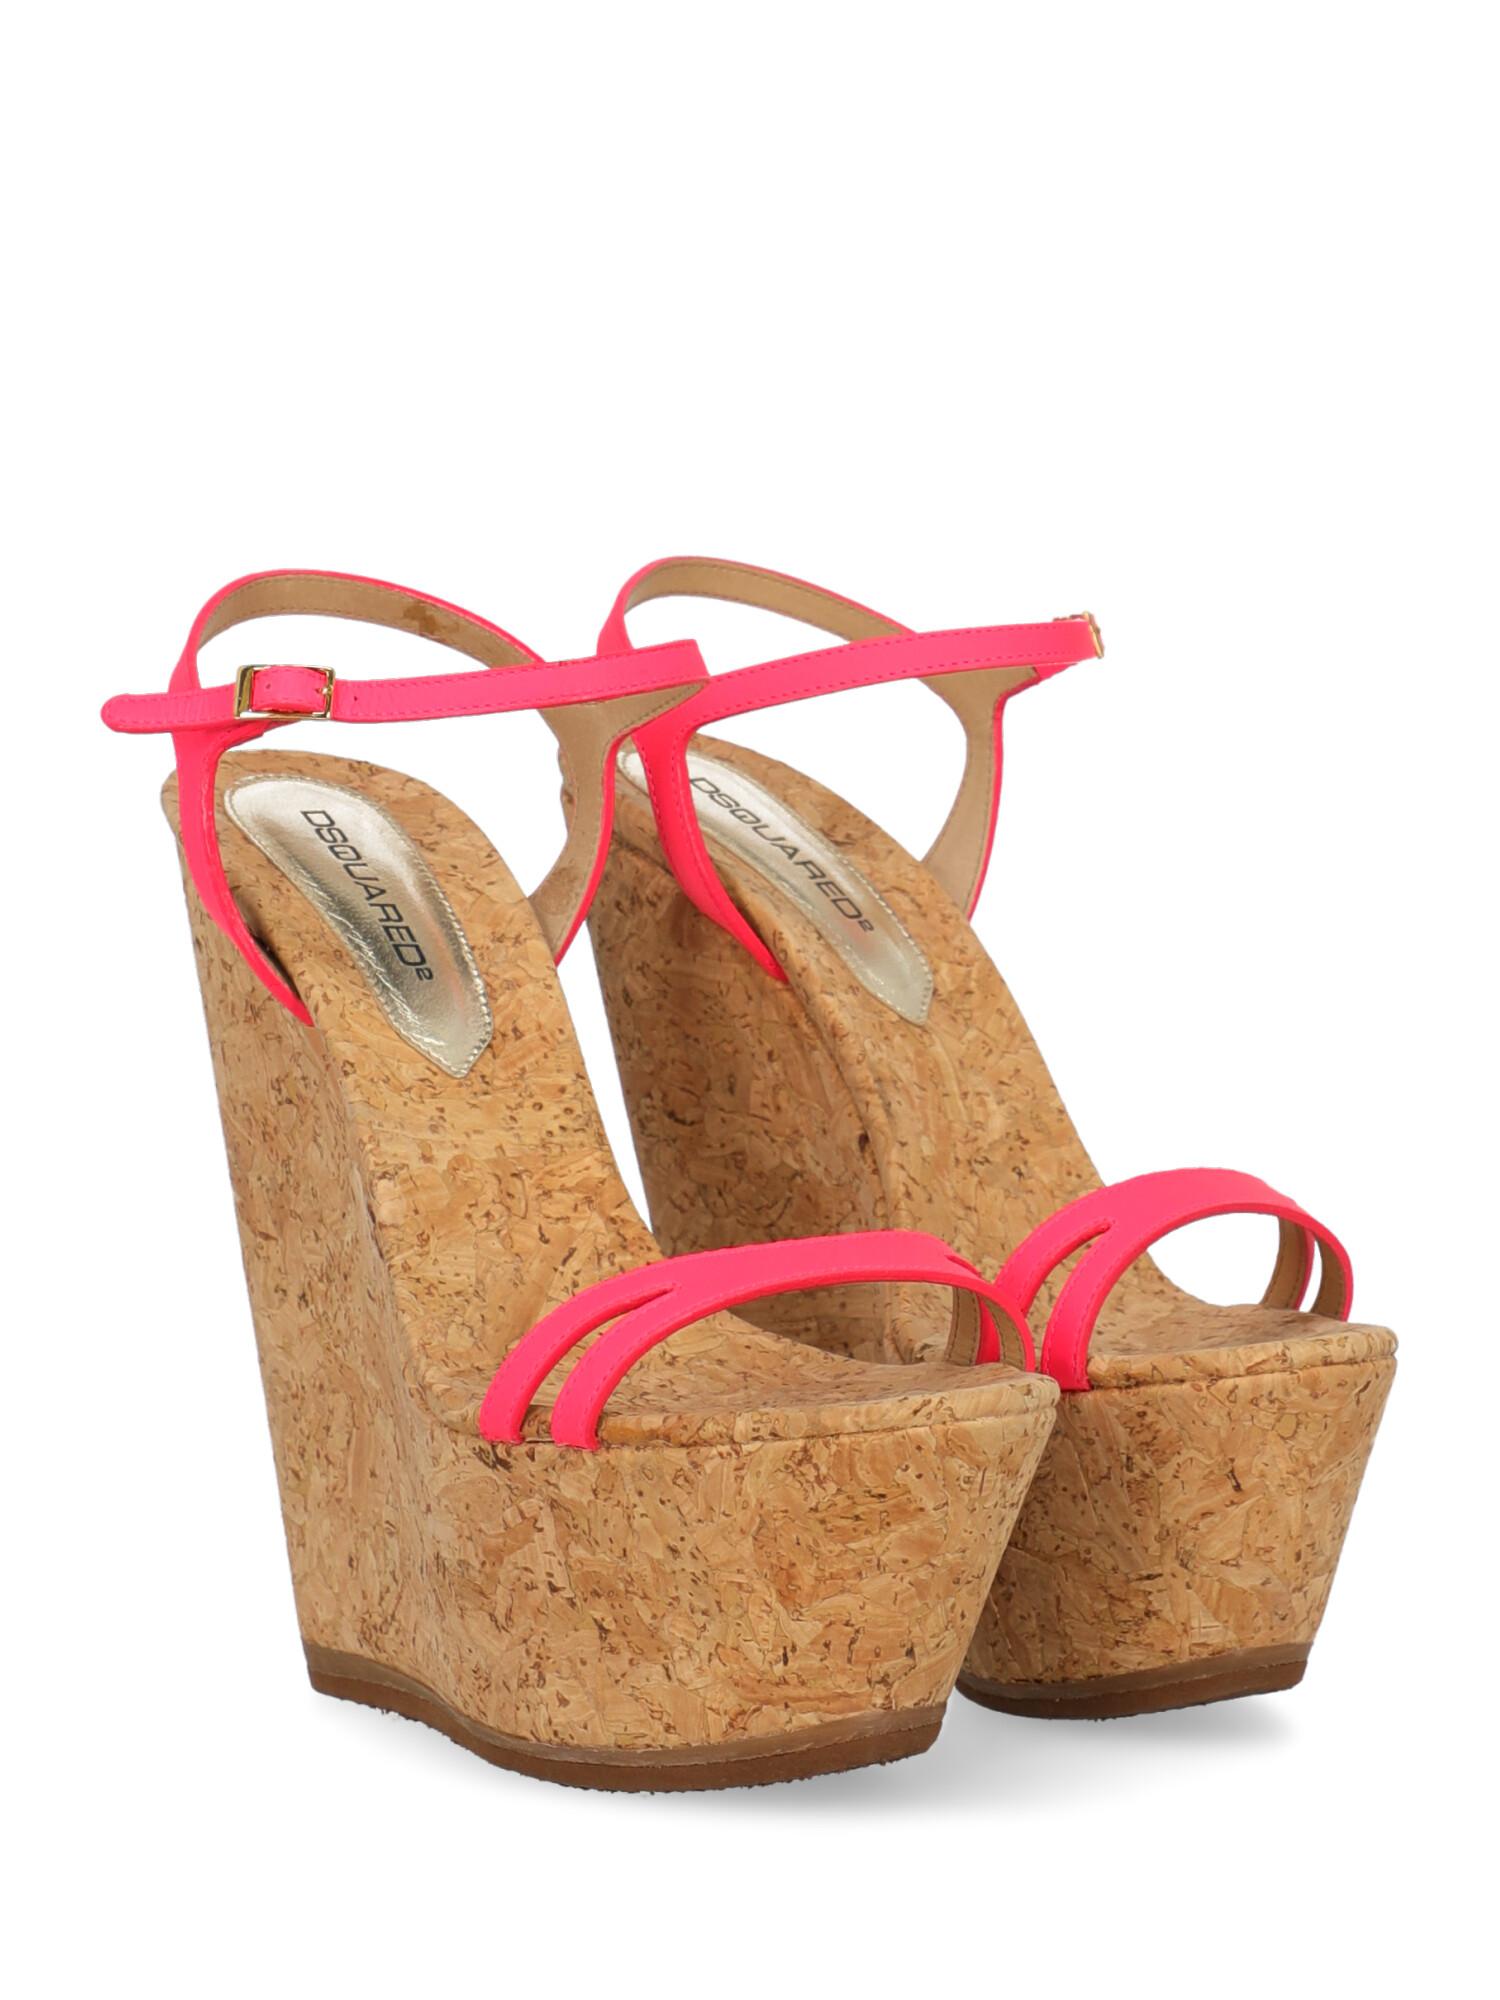 Shoe, eco-friendly fabric, solid color, matt effect, buckle fastening, gold-tone hardware, open toe, branded insole, wedge heel, high heel

Includes:
- Dust bag

Product Condition: Excellent
Sole: negligible signs of use.

Measurements:
Height: 15